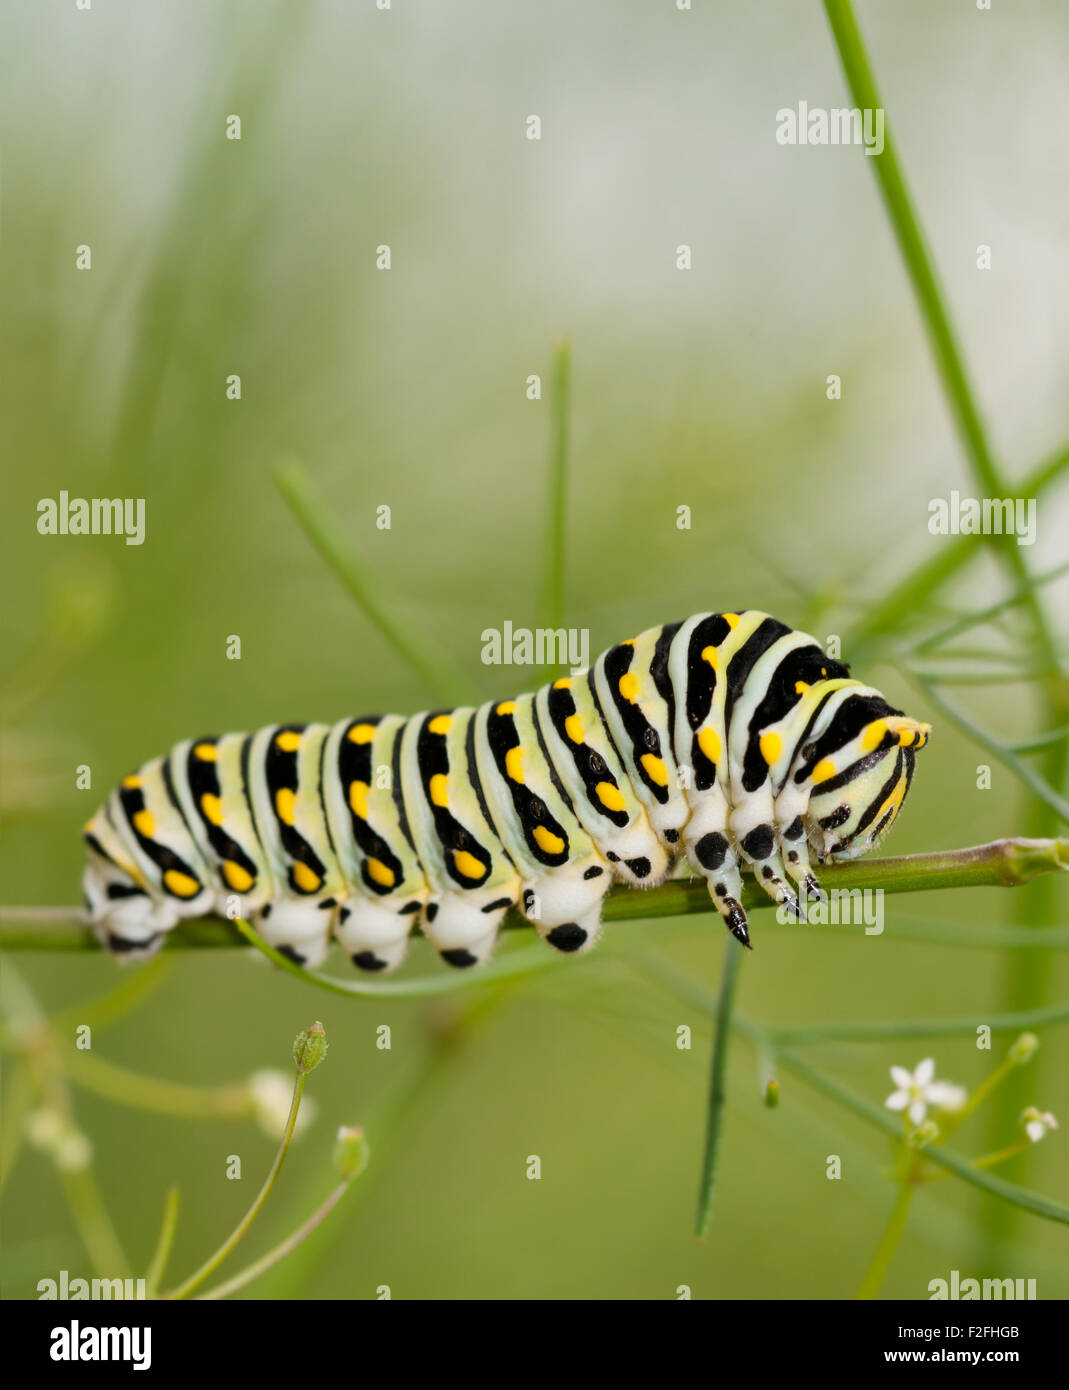 Black Swallowtail caterpillar feeding on a plant from the carrot family, Apiaceae Stock Photo